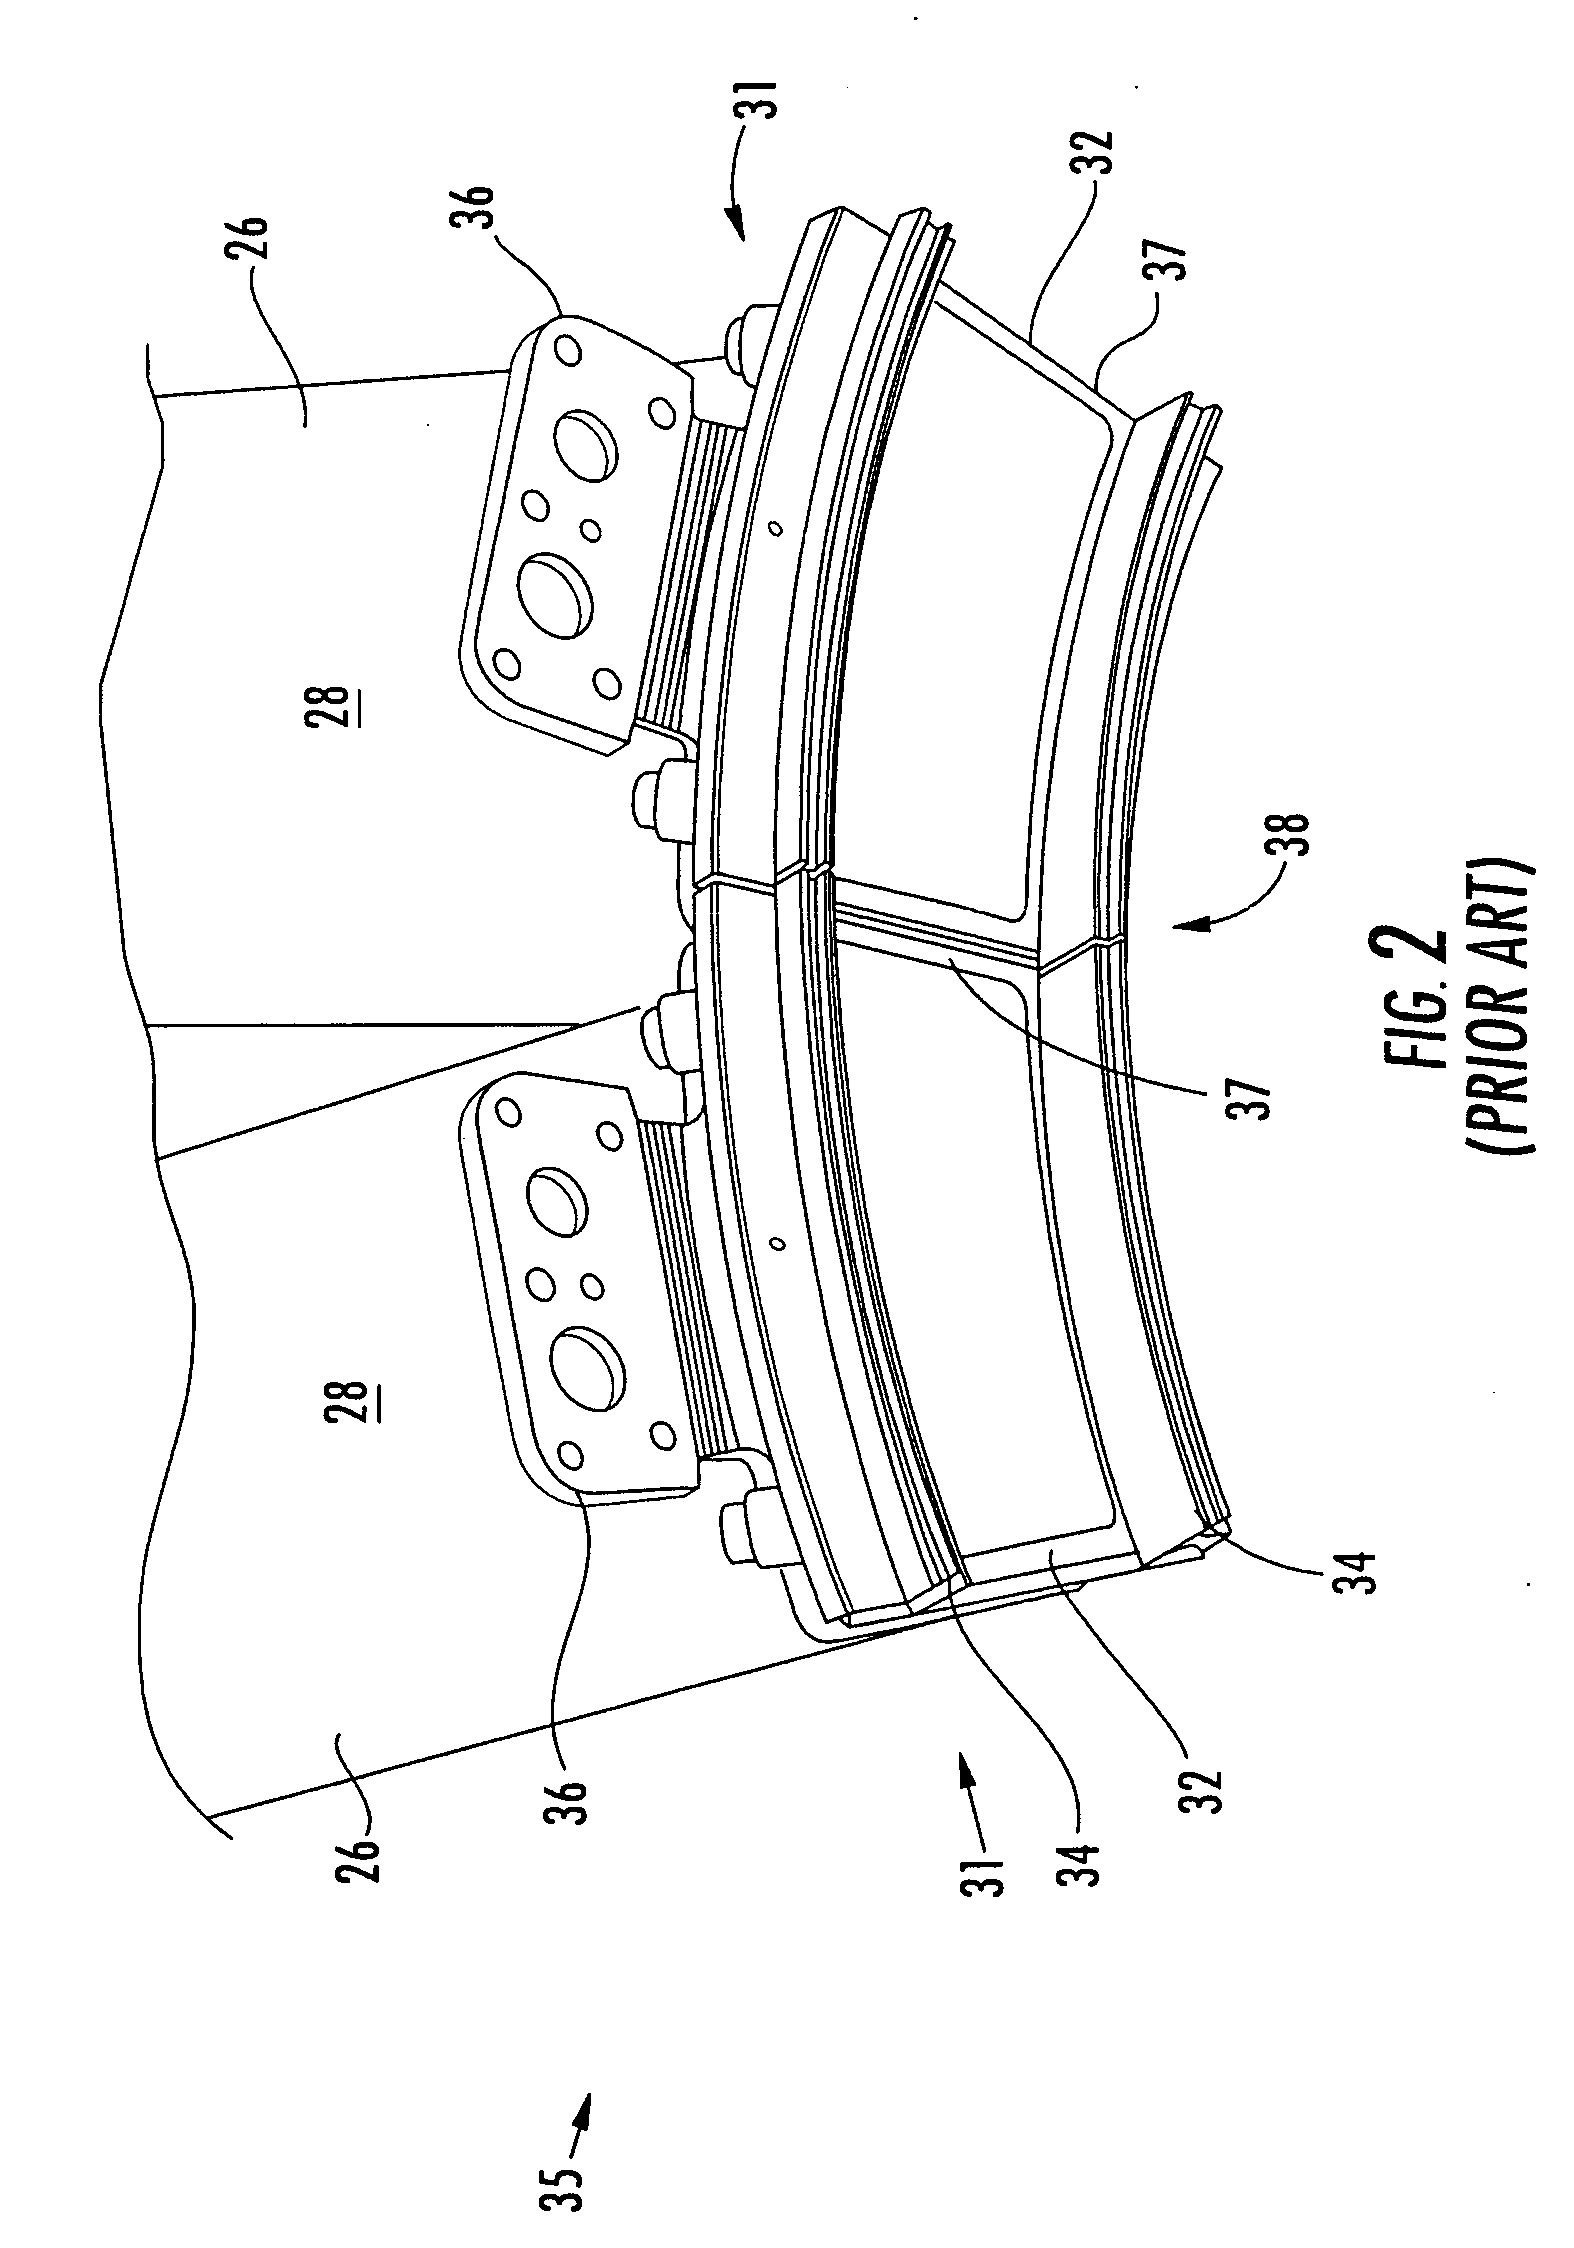 Support system for transition ducts